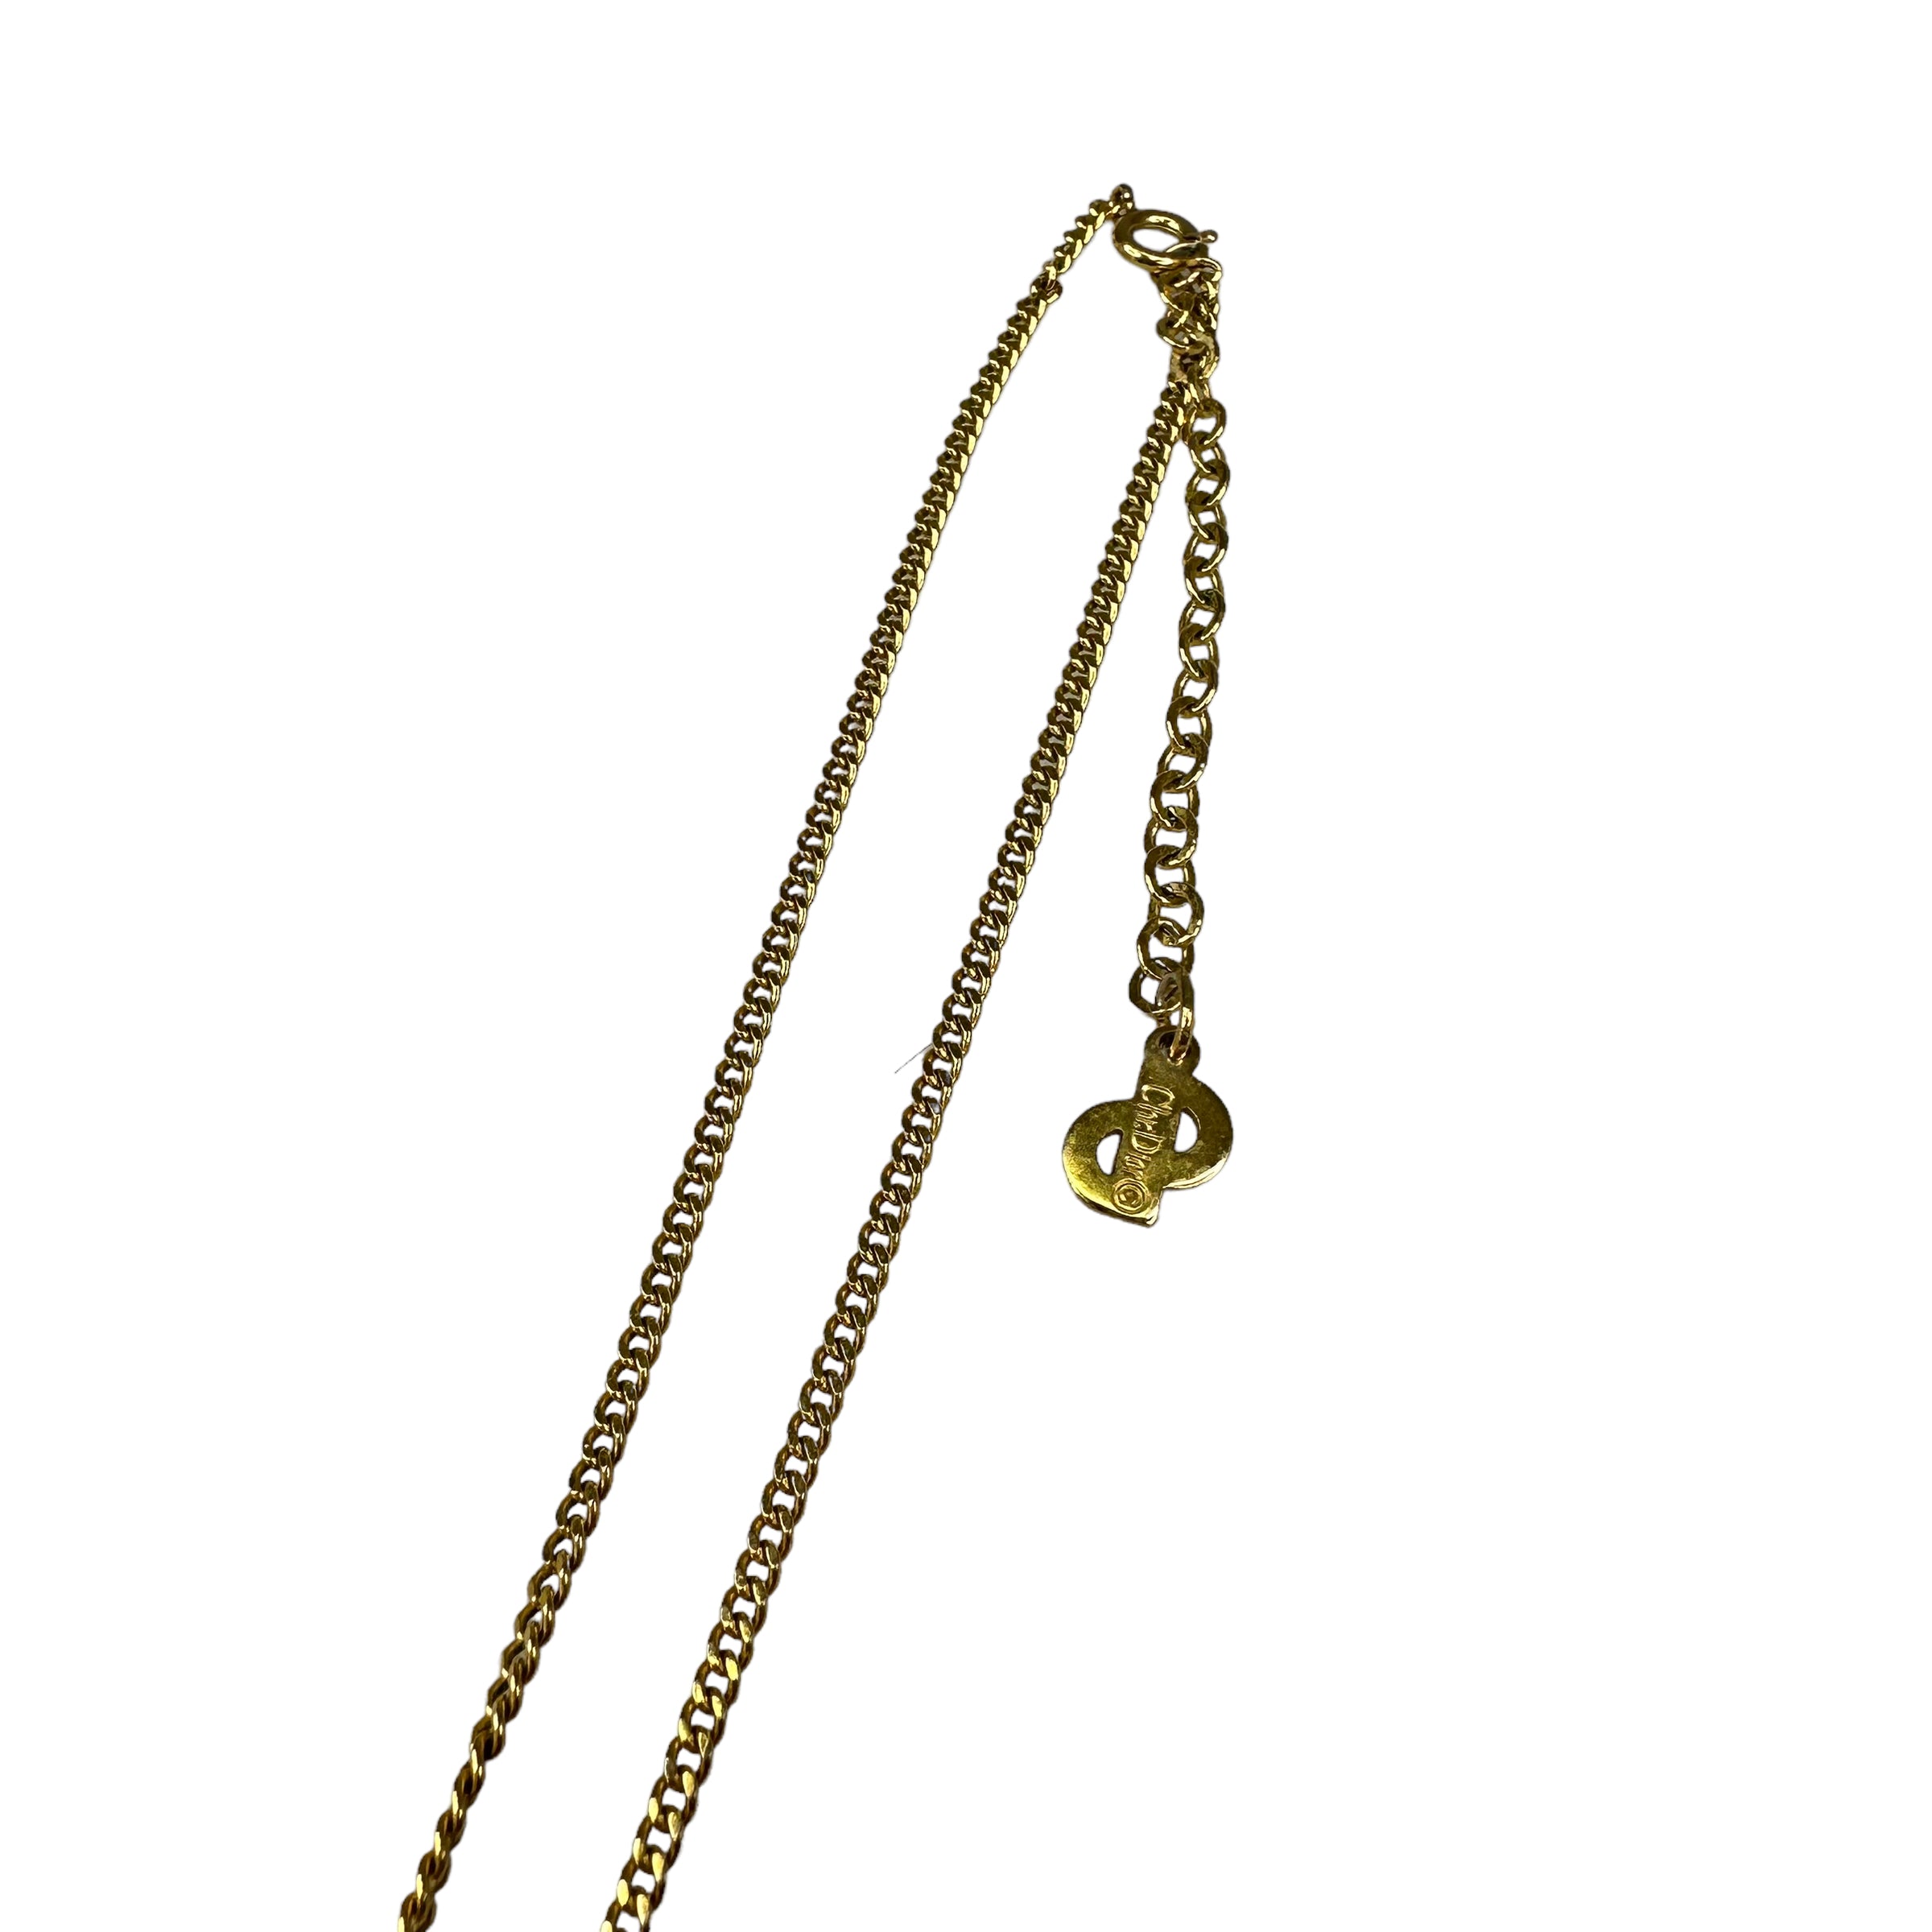 DIOR GOLD OVAL CD PENDANT NECKLACE